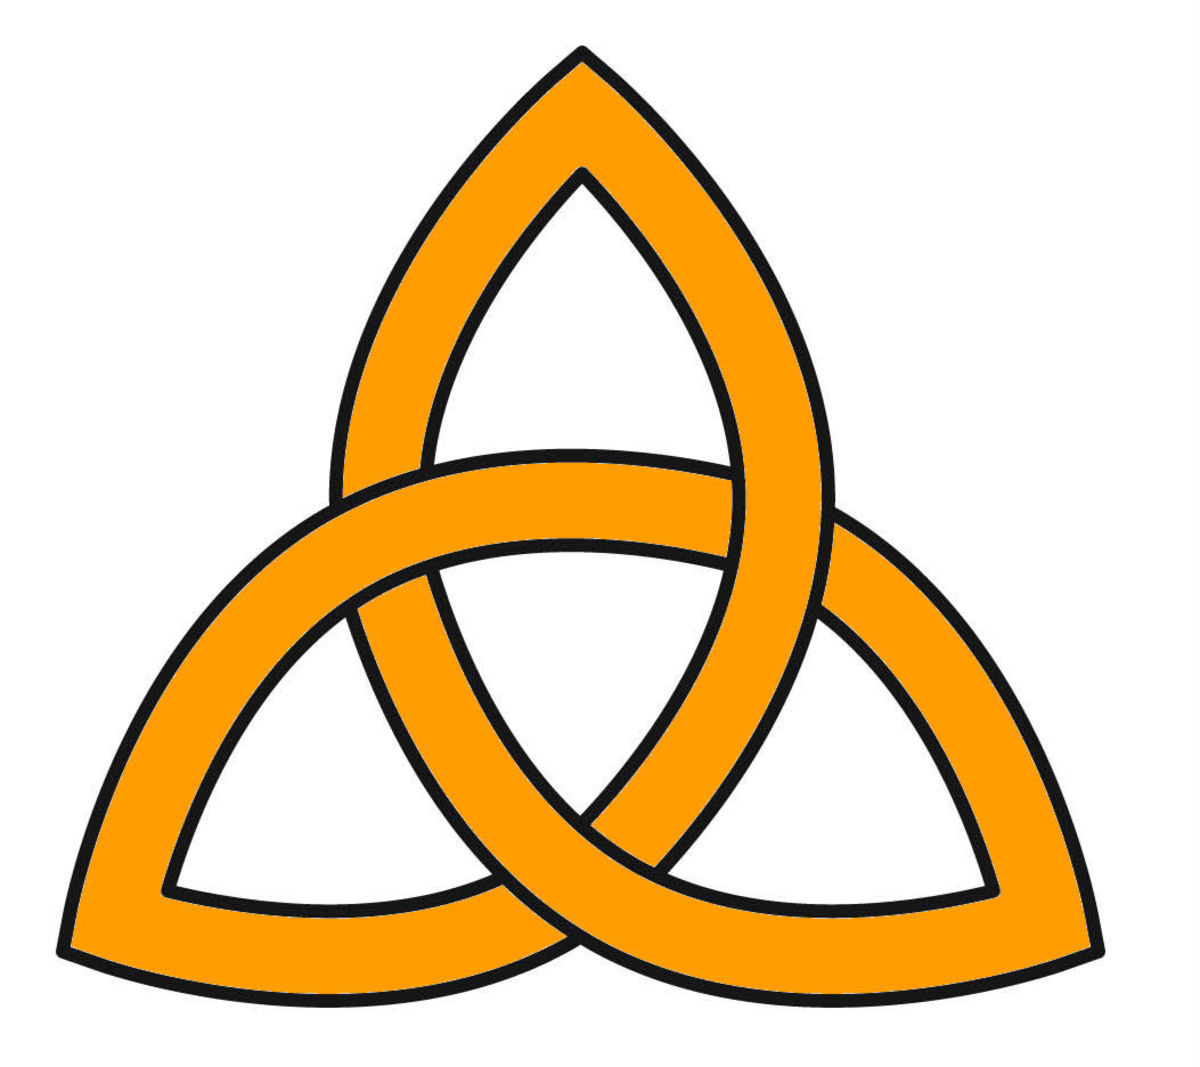 Traditional symbol for the Holy Trinity